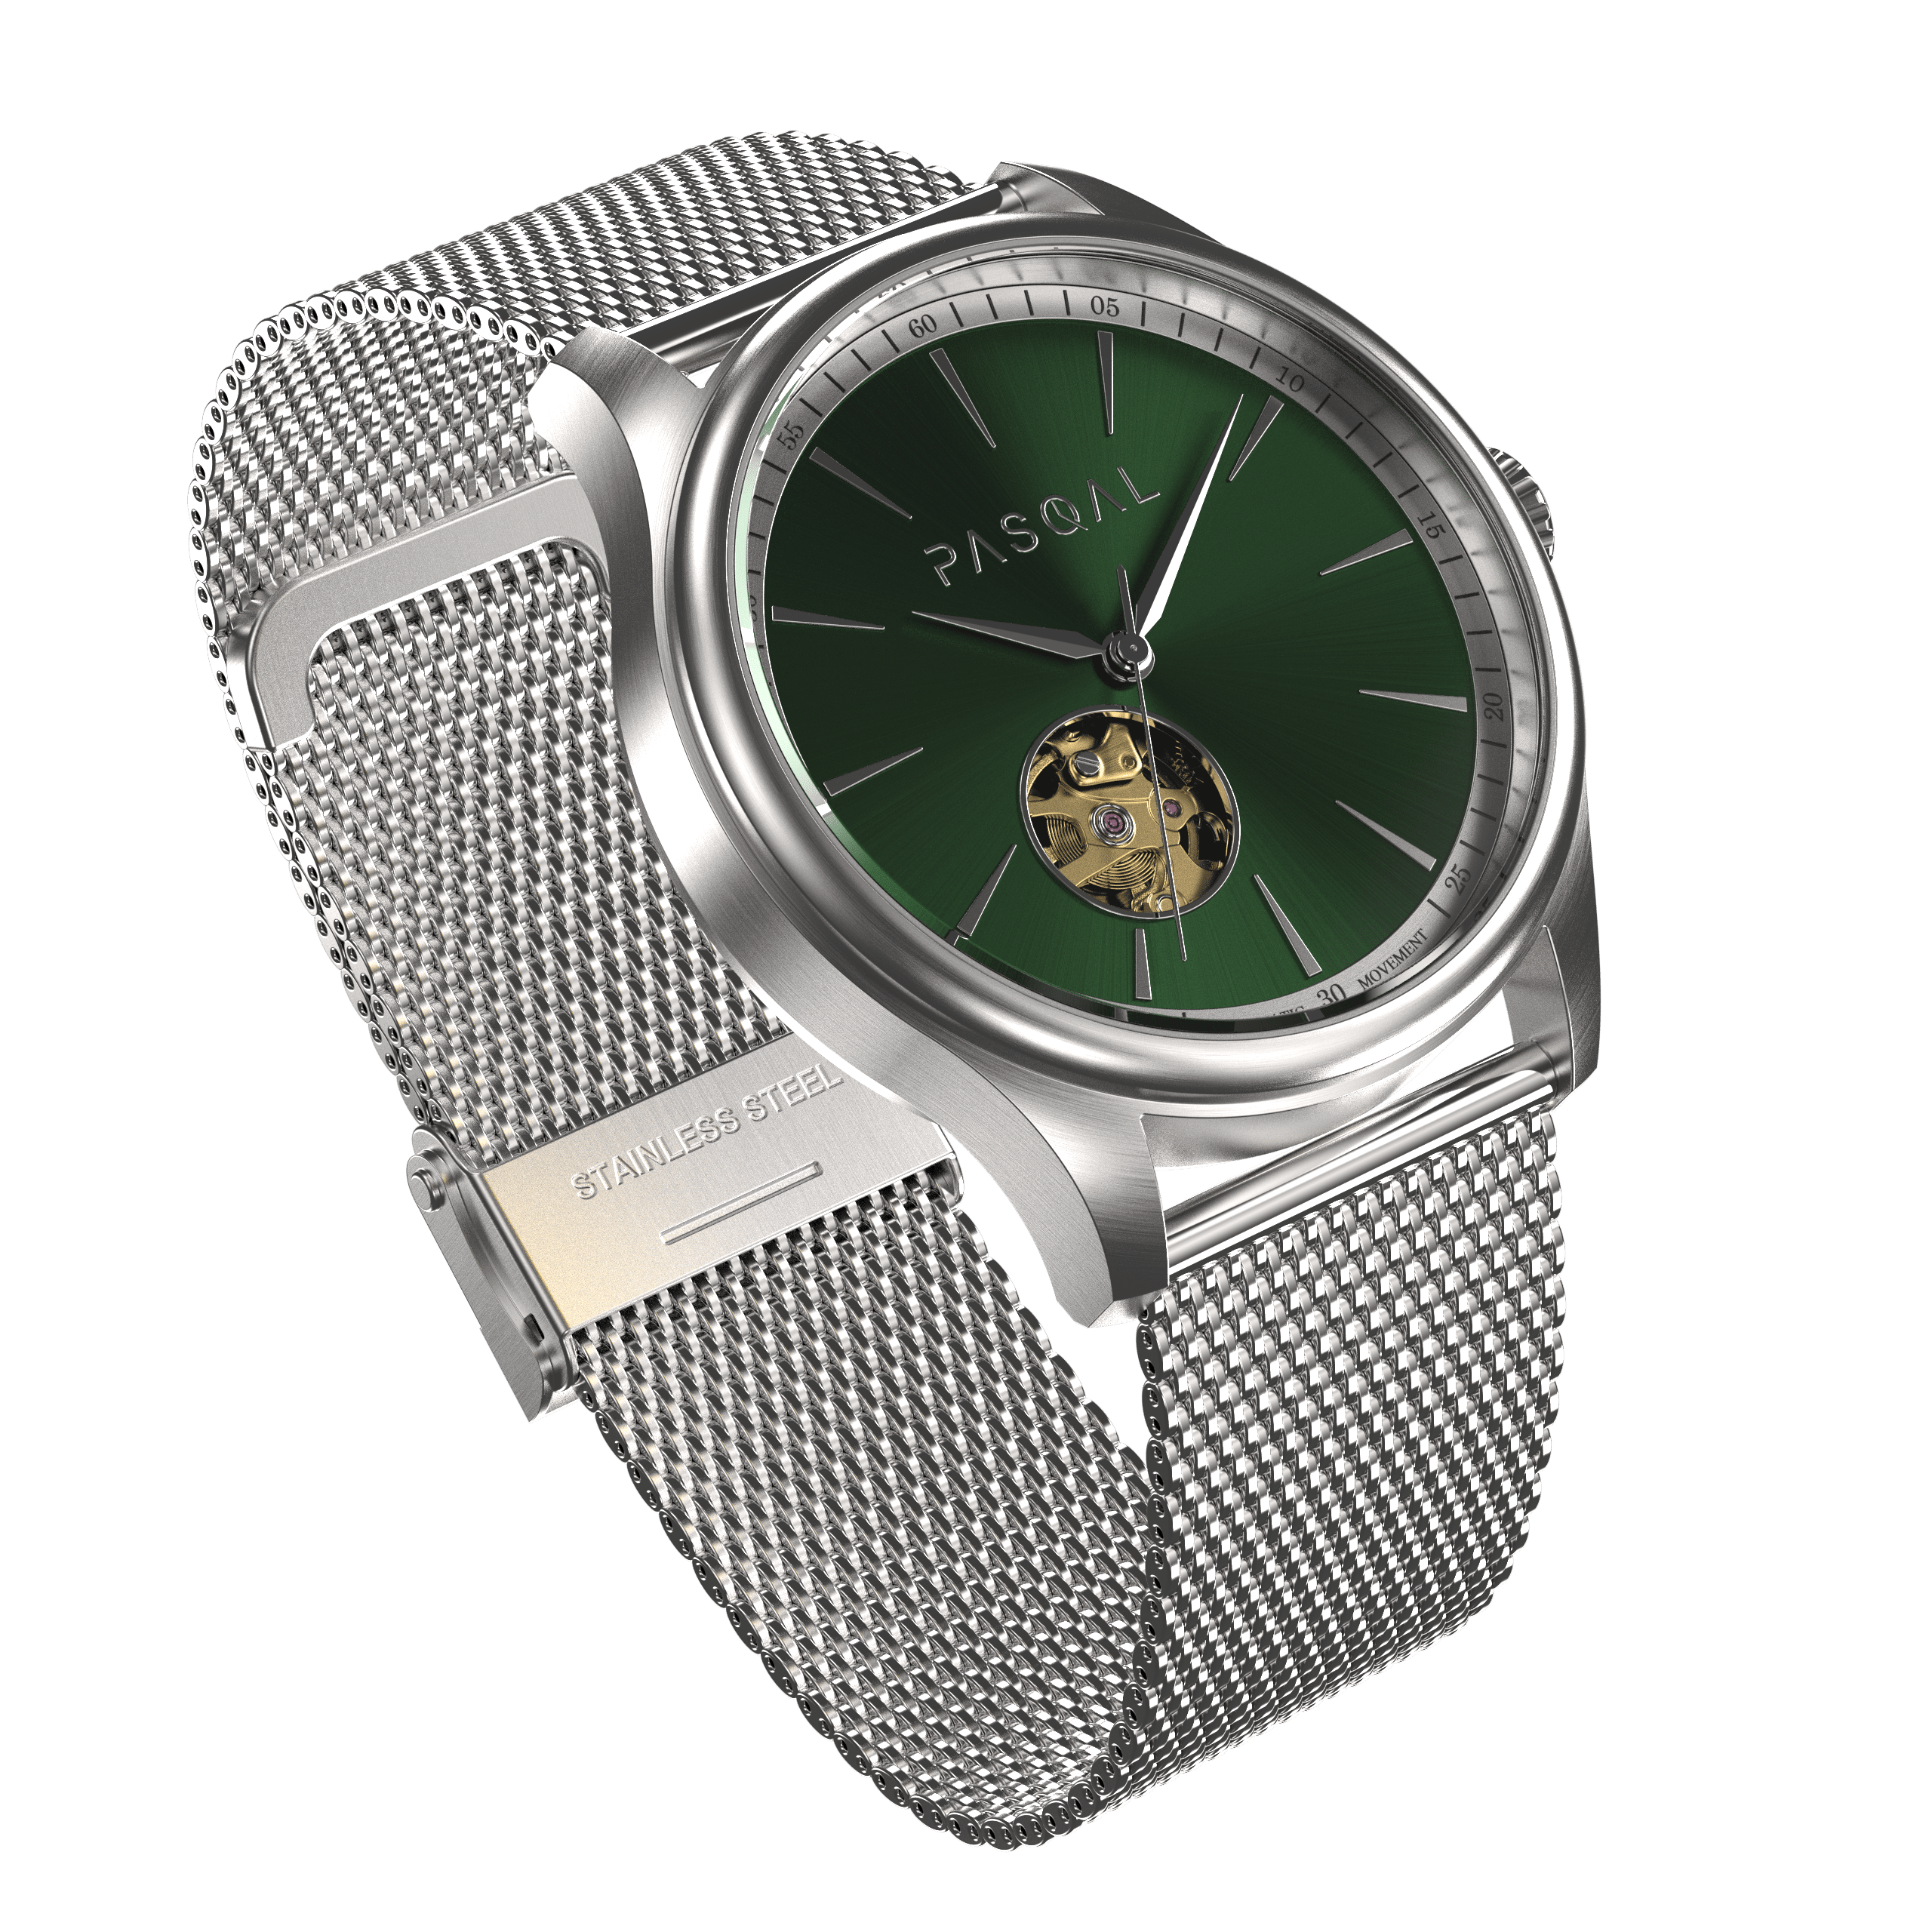 Wilhelm 42 Silver/Green - Pasqal Watches